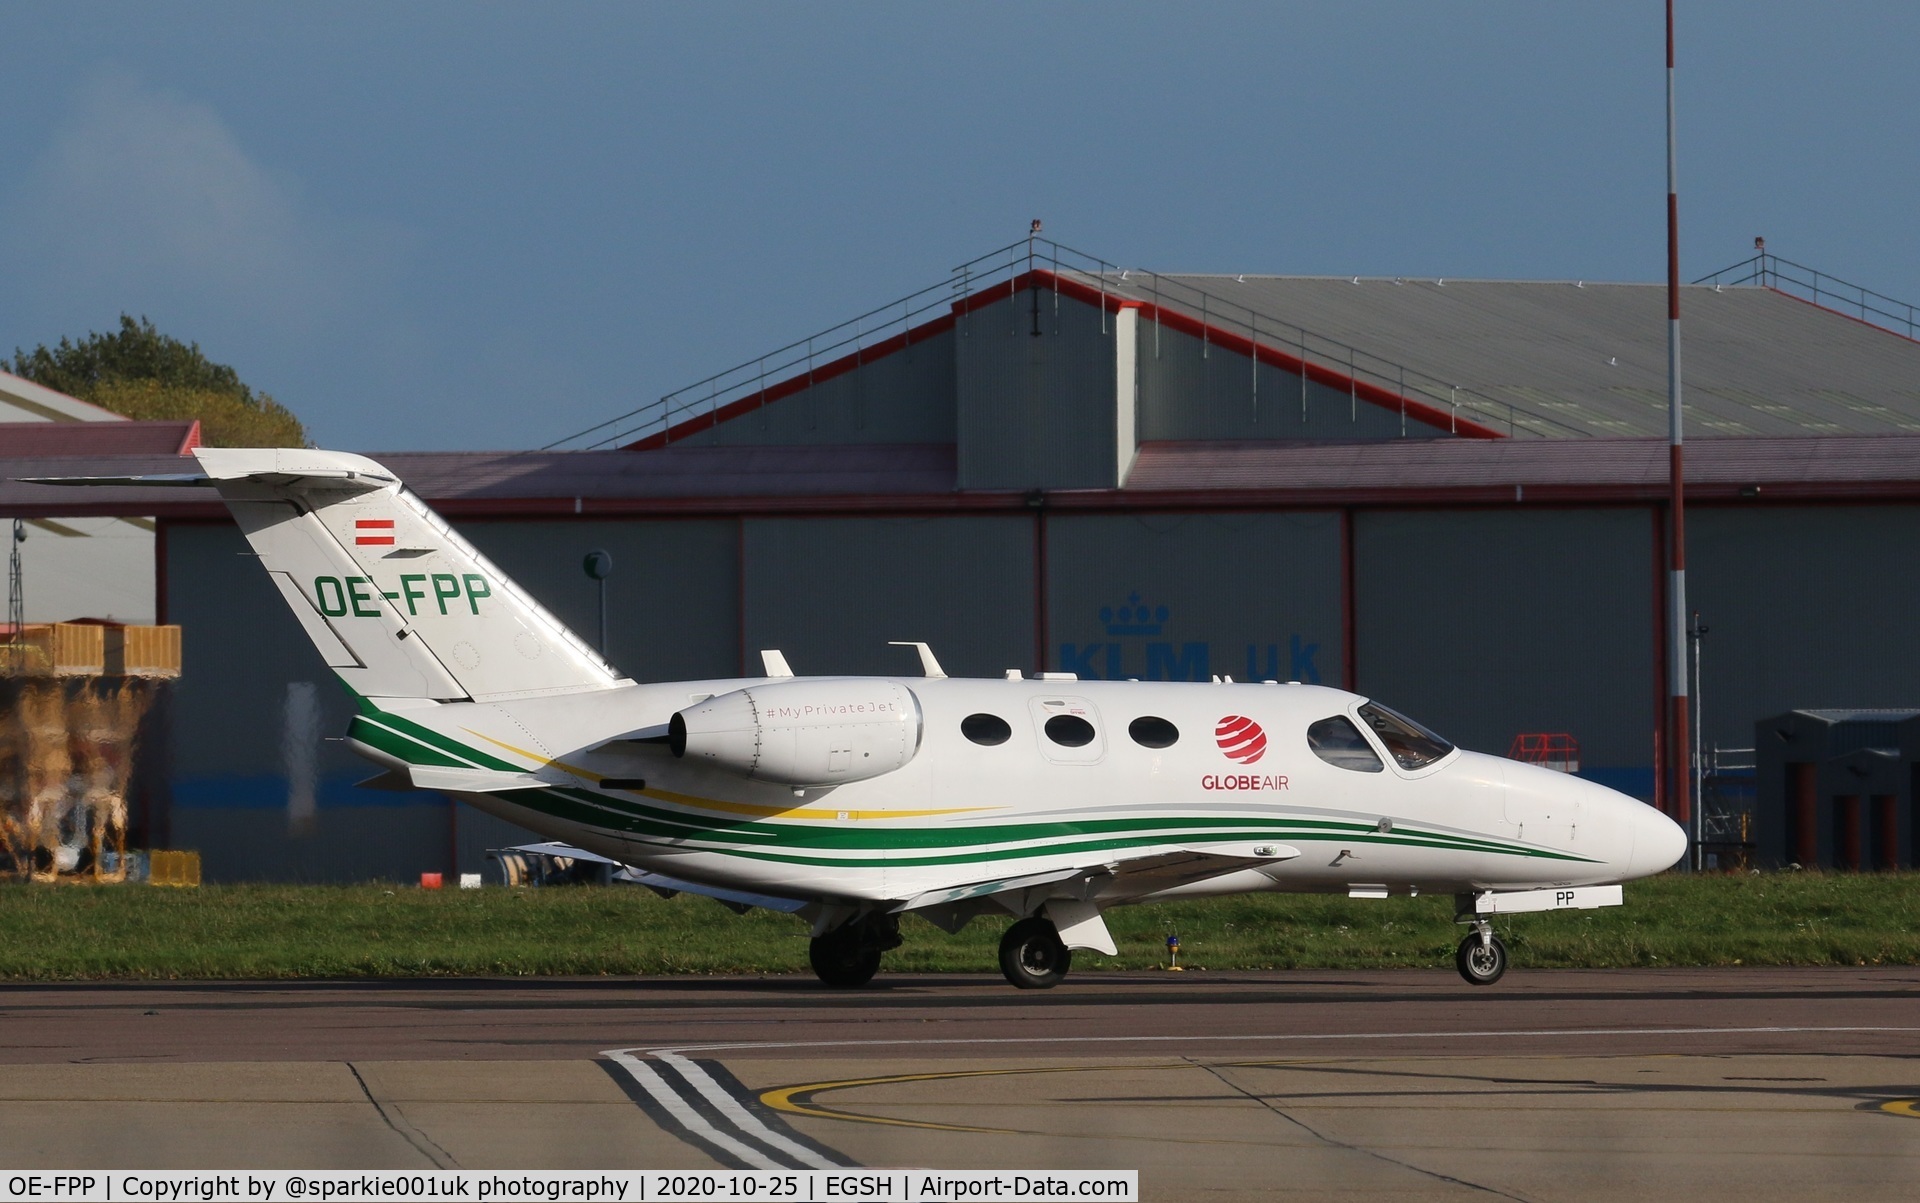 OE-FPP, 2009 Cessna 510 Citation Mustang Citation Mustang C/N 510-0186, Arriving at Norwich